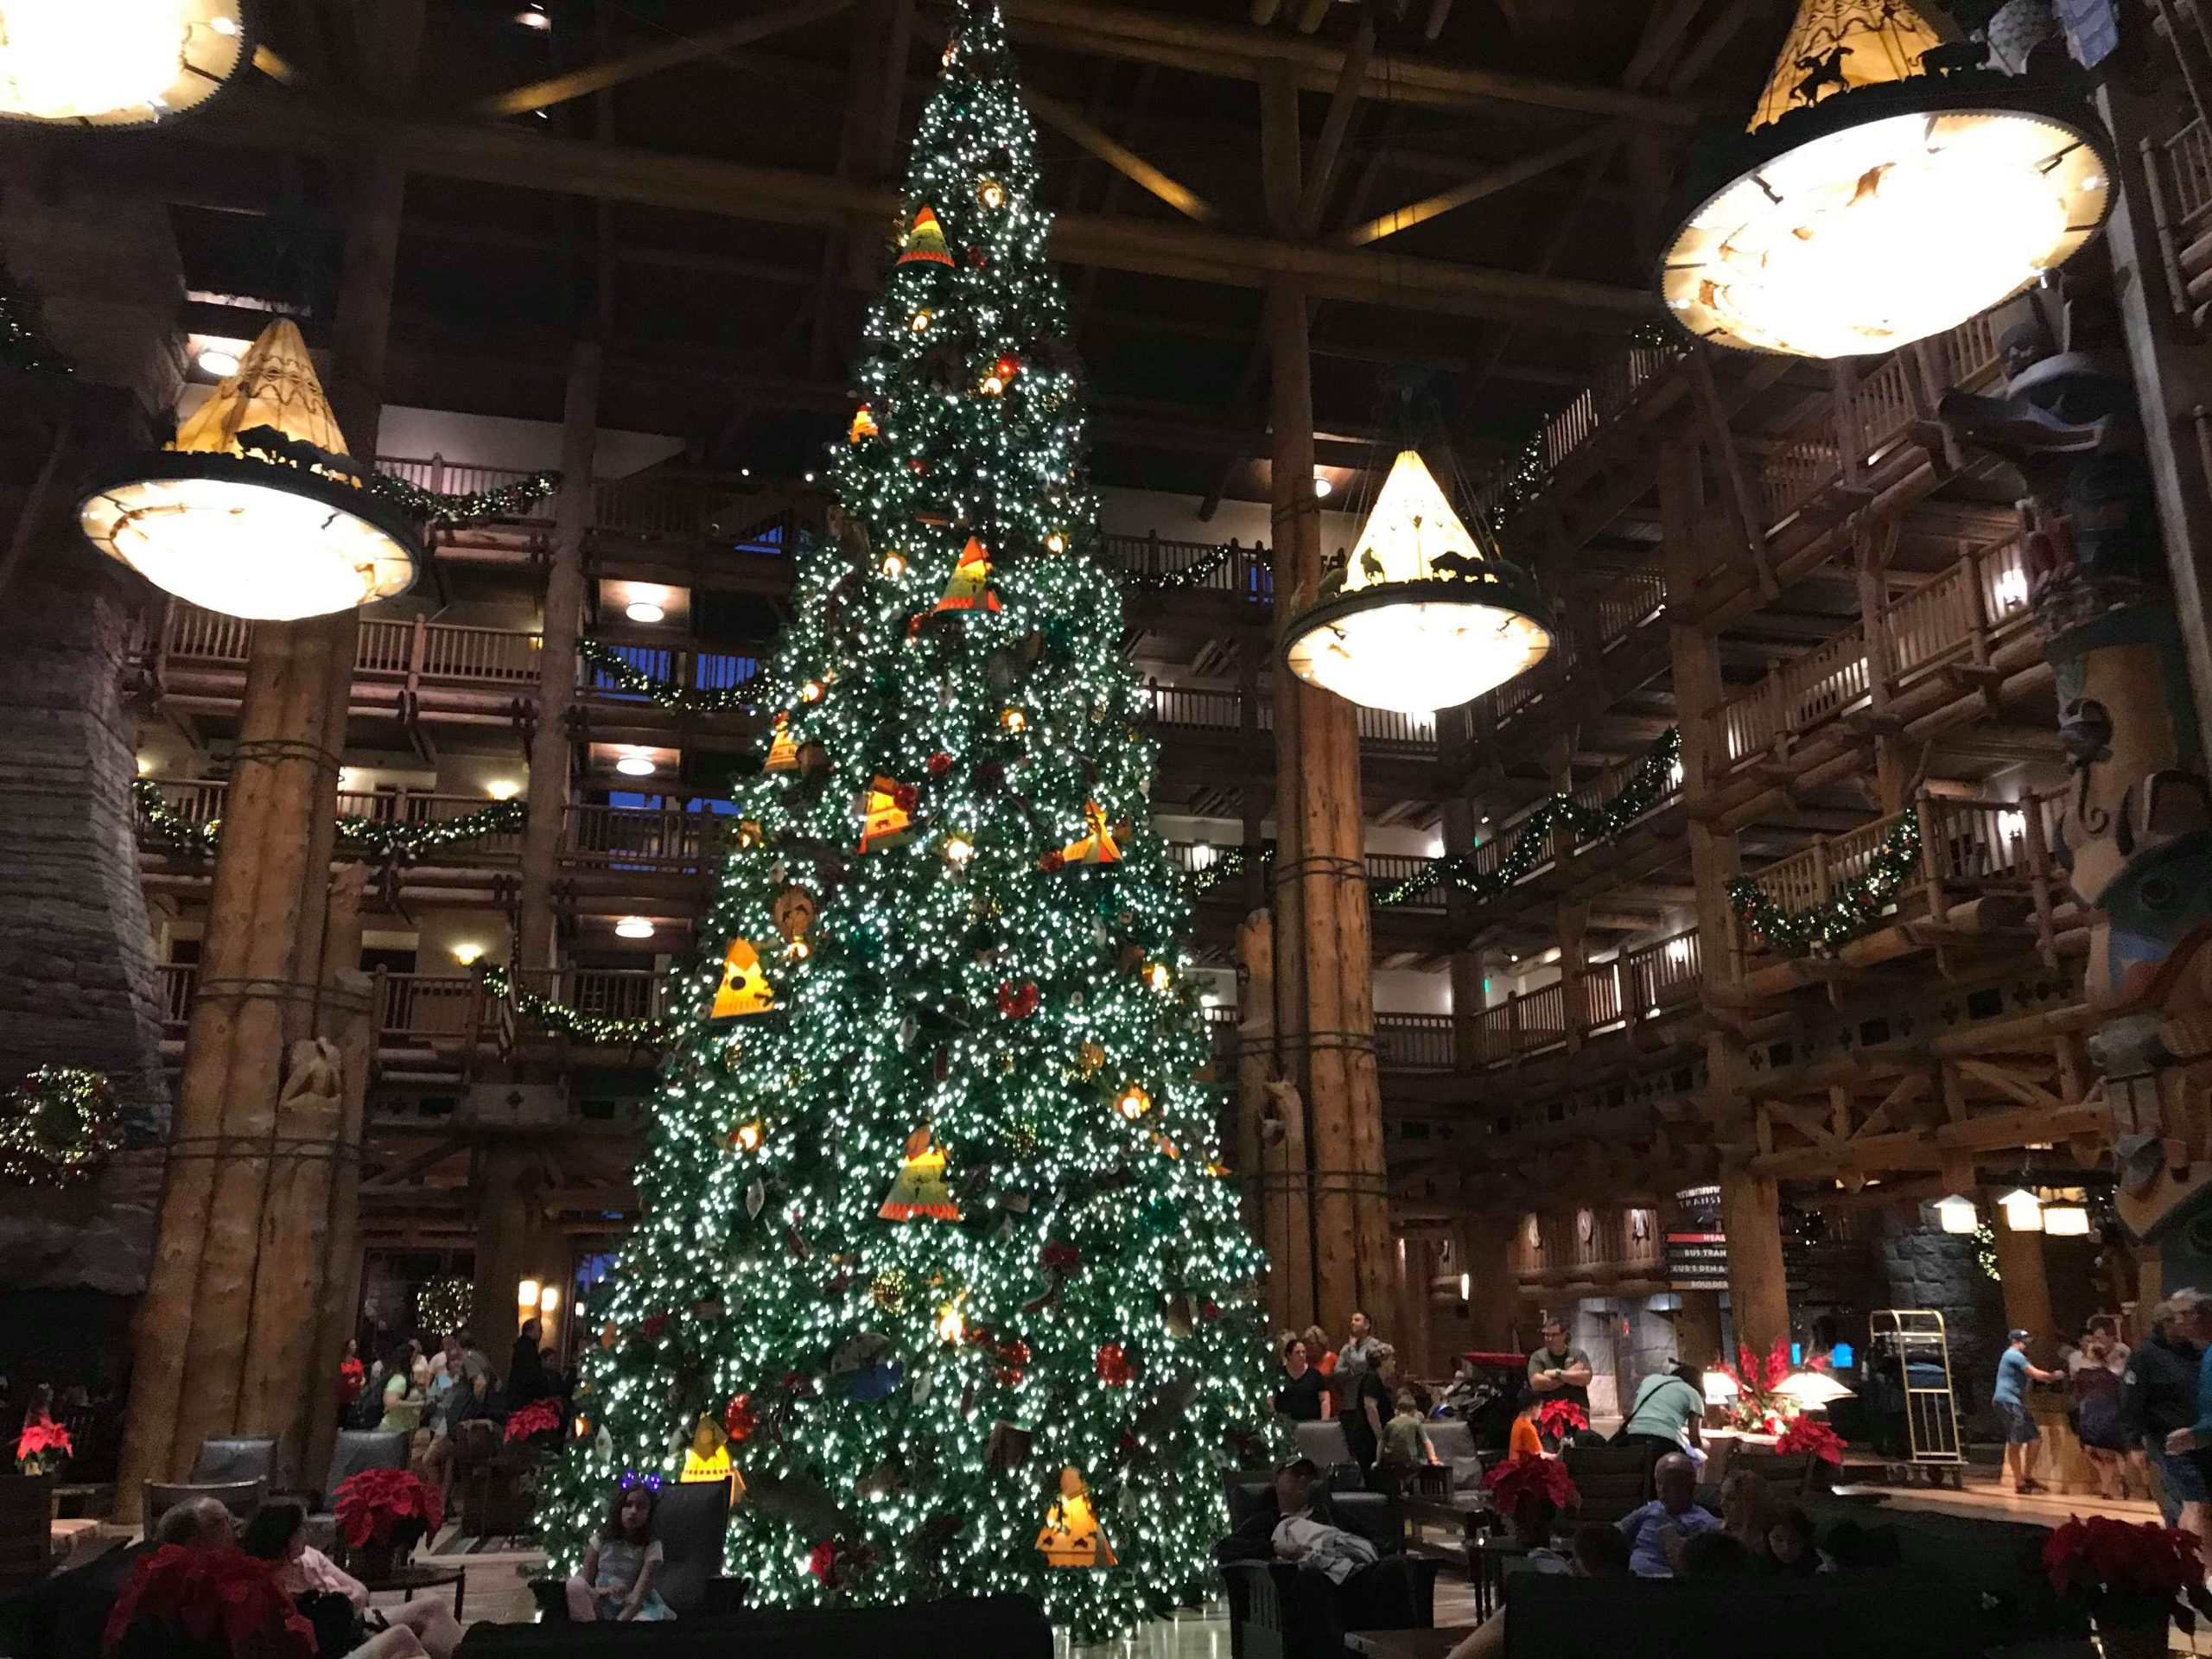 The Christmas Tree at Disney’s Wilderness Lodge